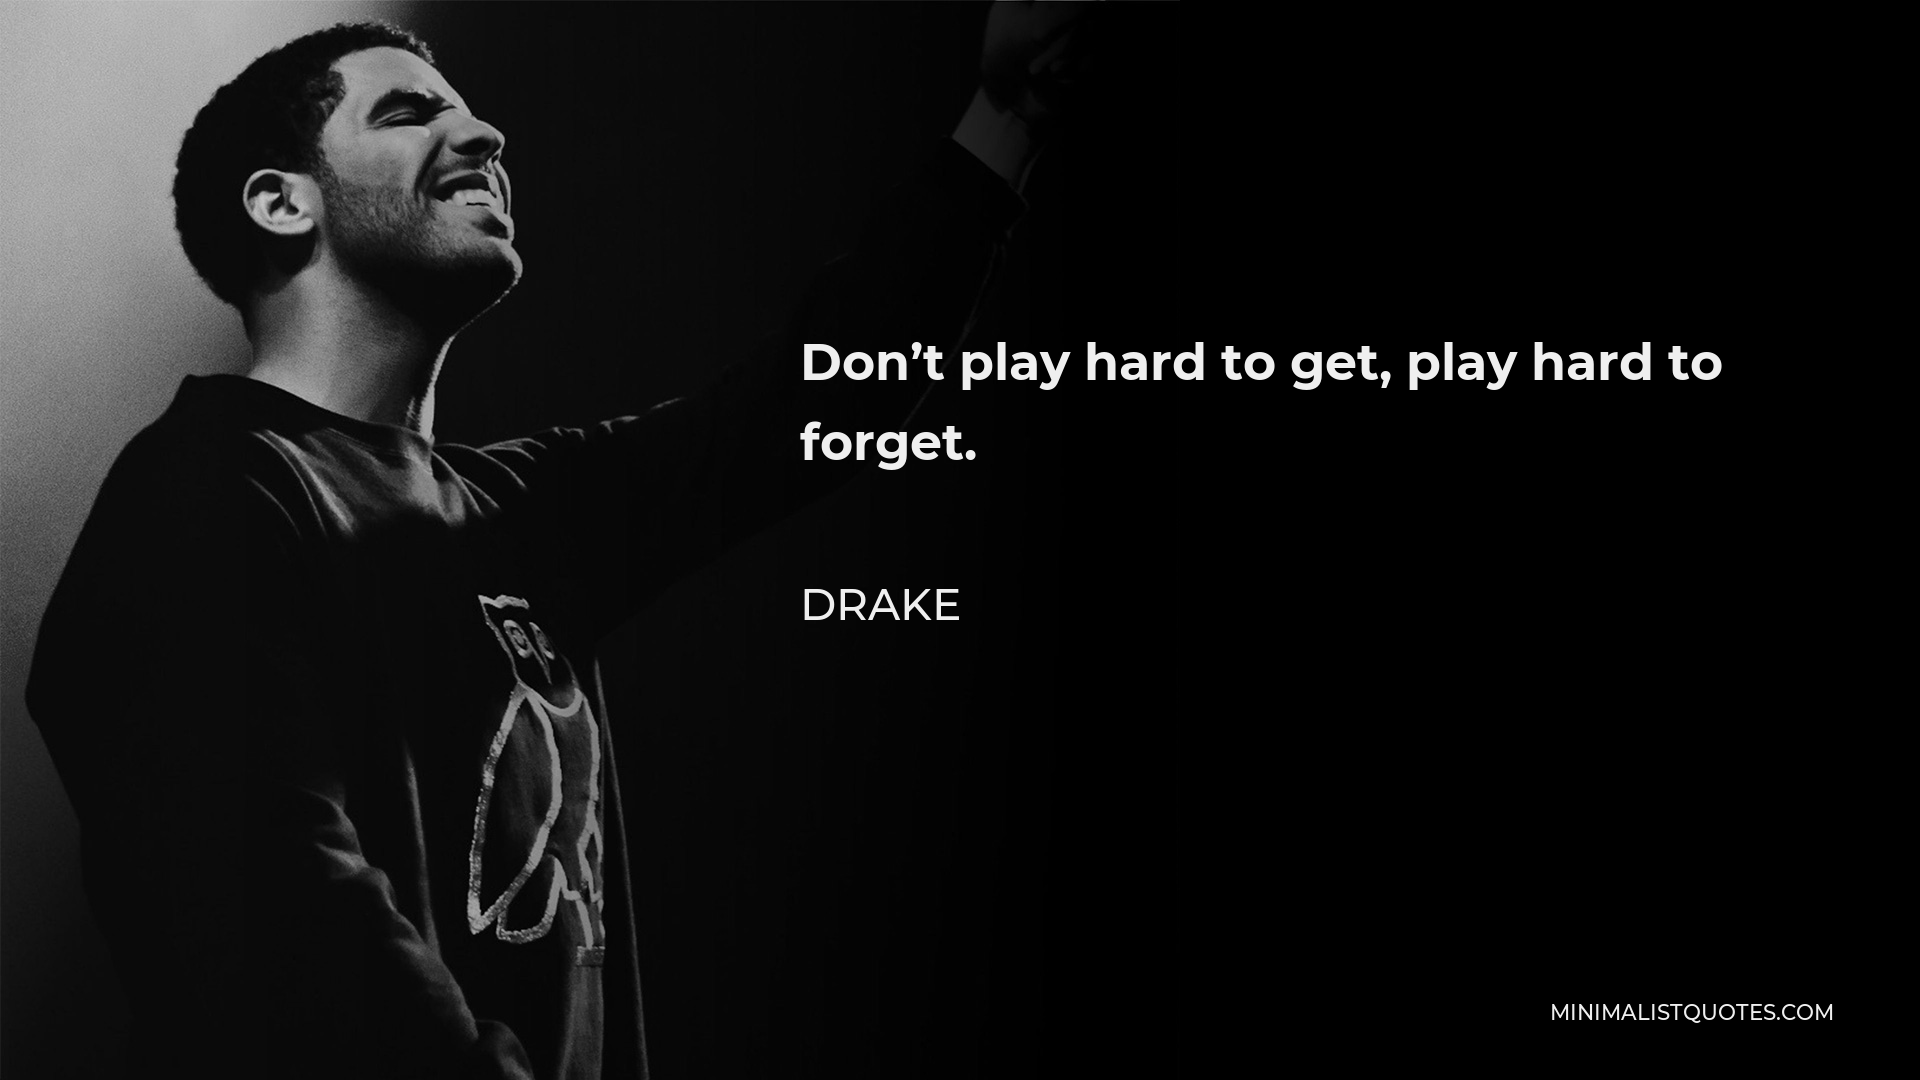 Drake Quote - Don’t play hard to get, play hard to forget.